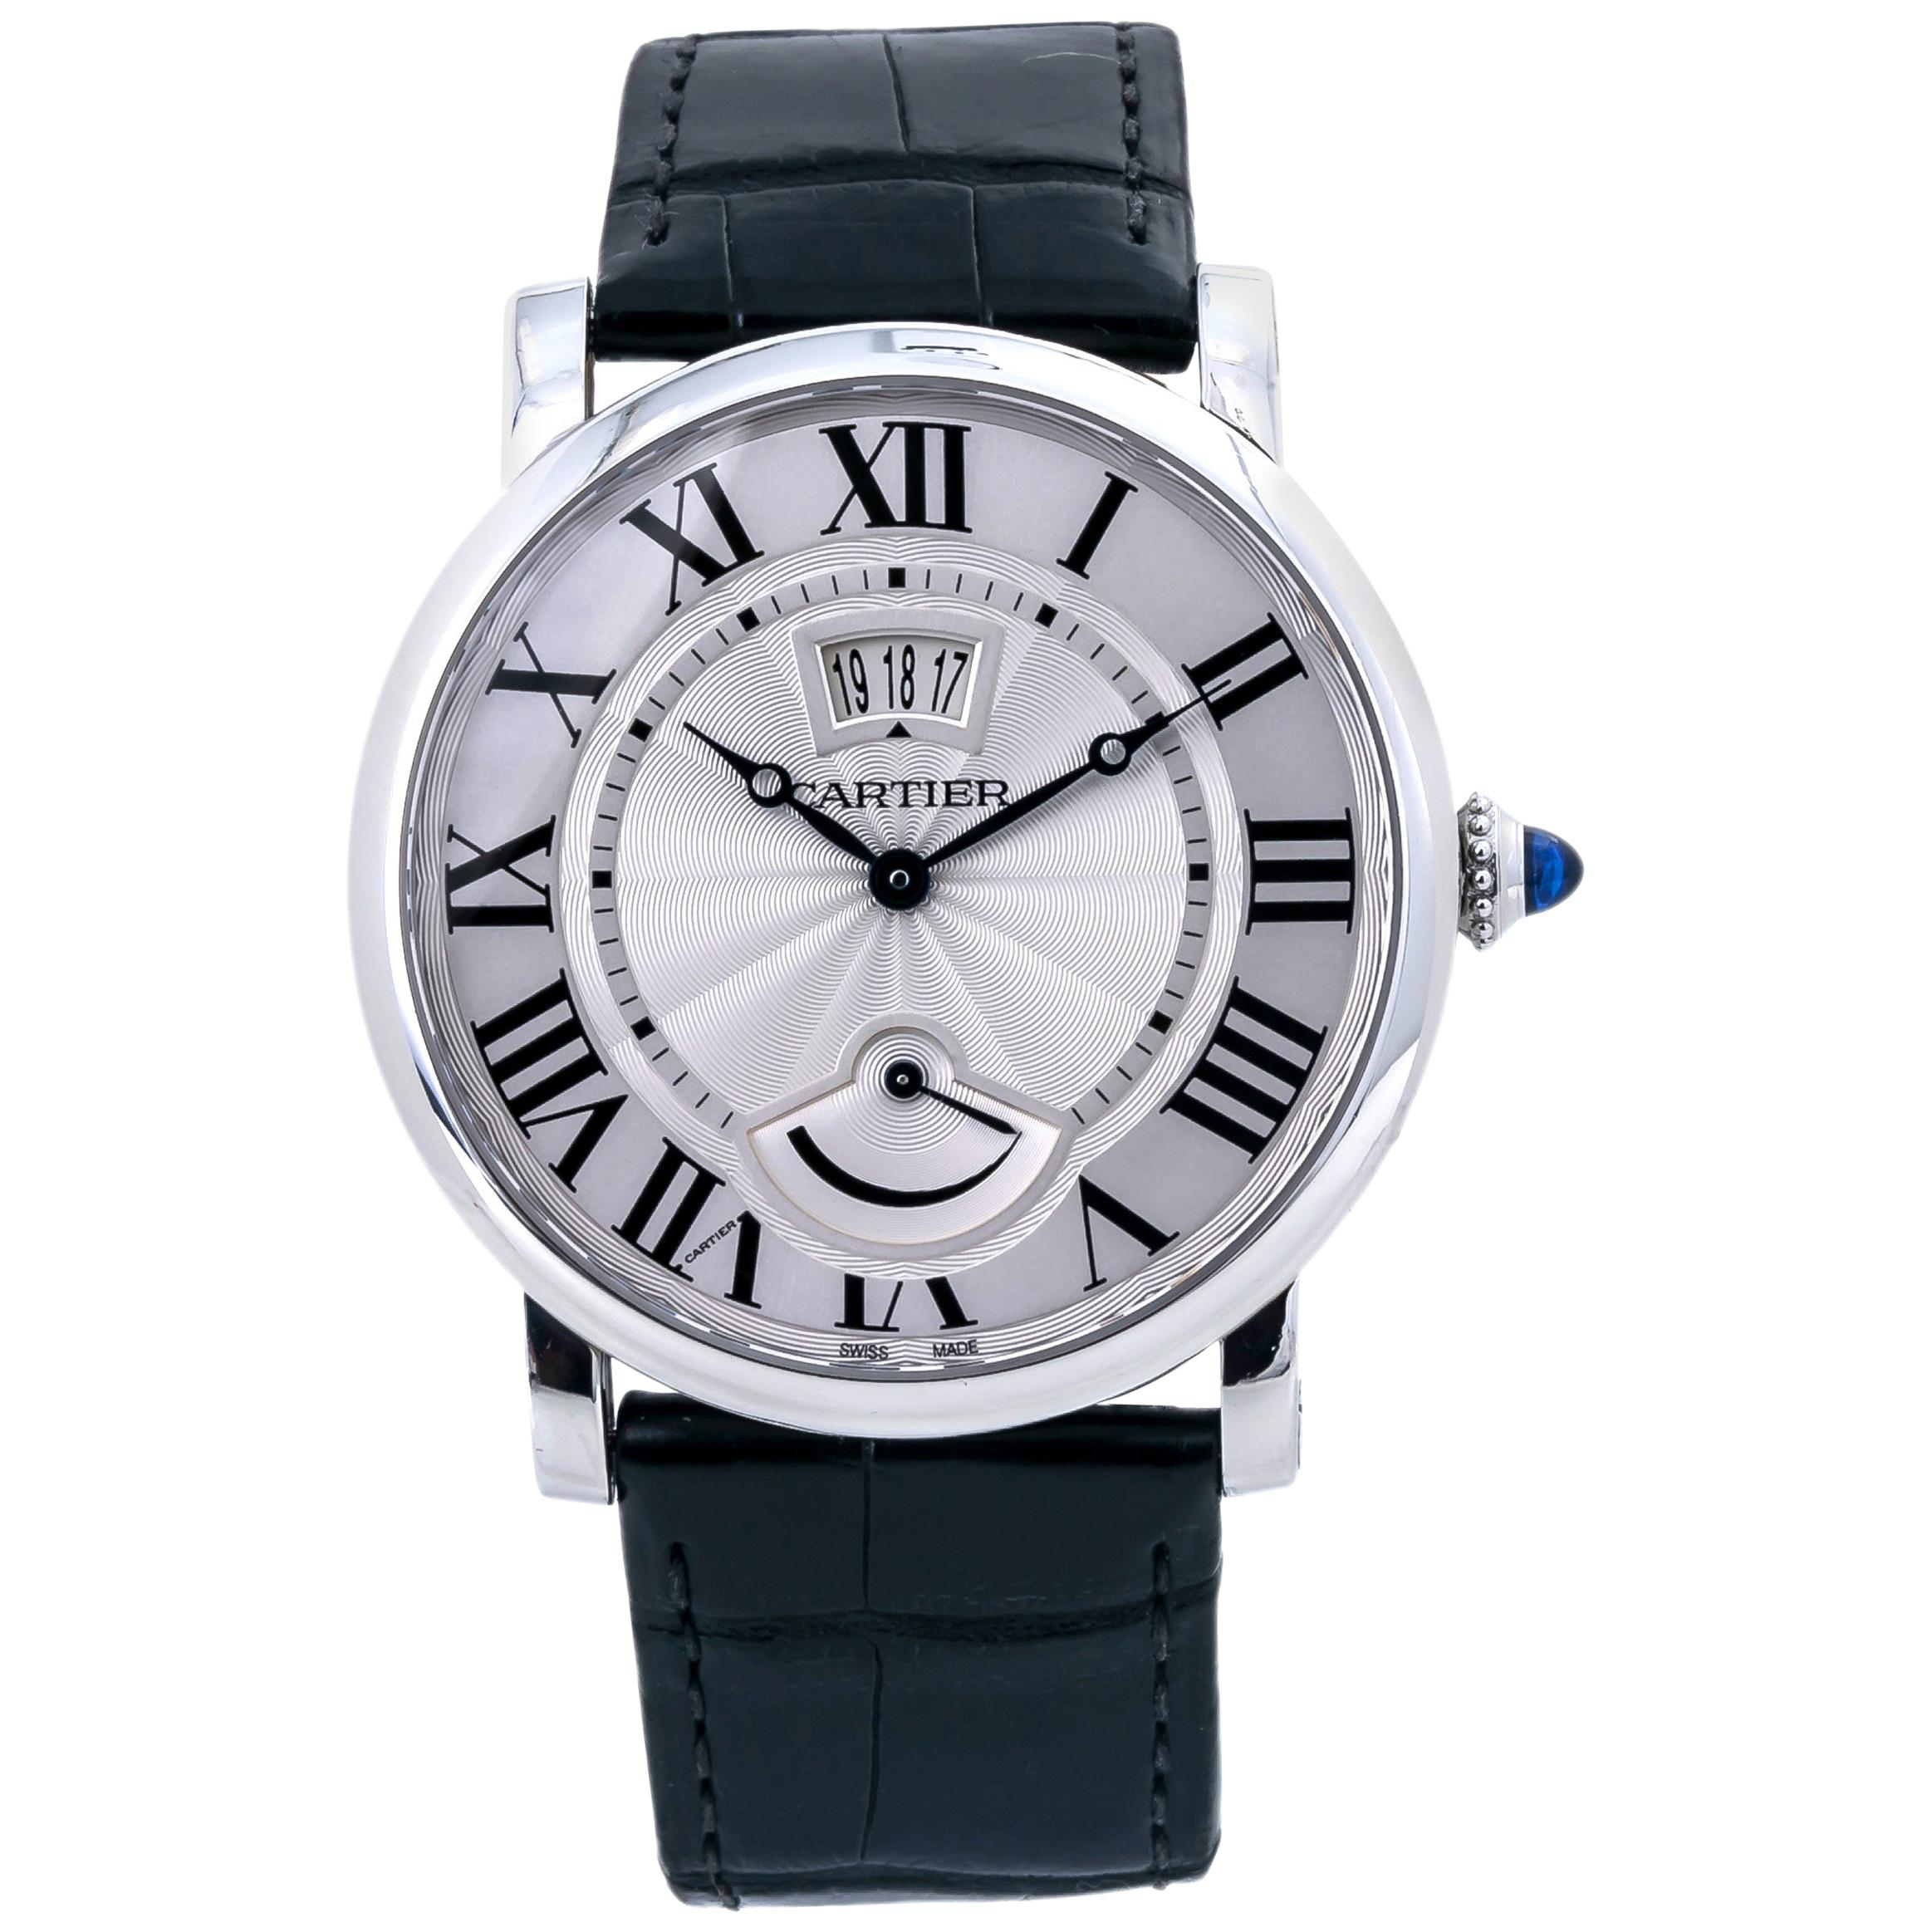 Cartier Rotonde W1556369 Manual Wind Stainless Leather Men's Watch For Sale